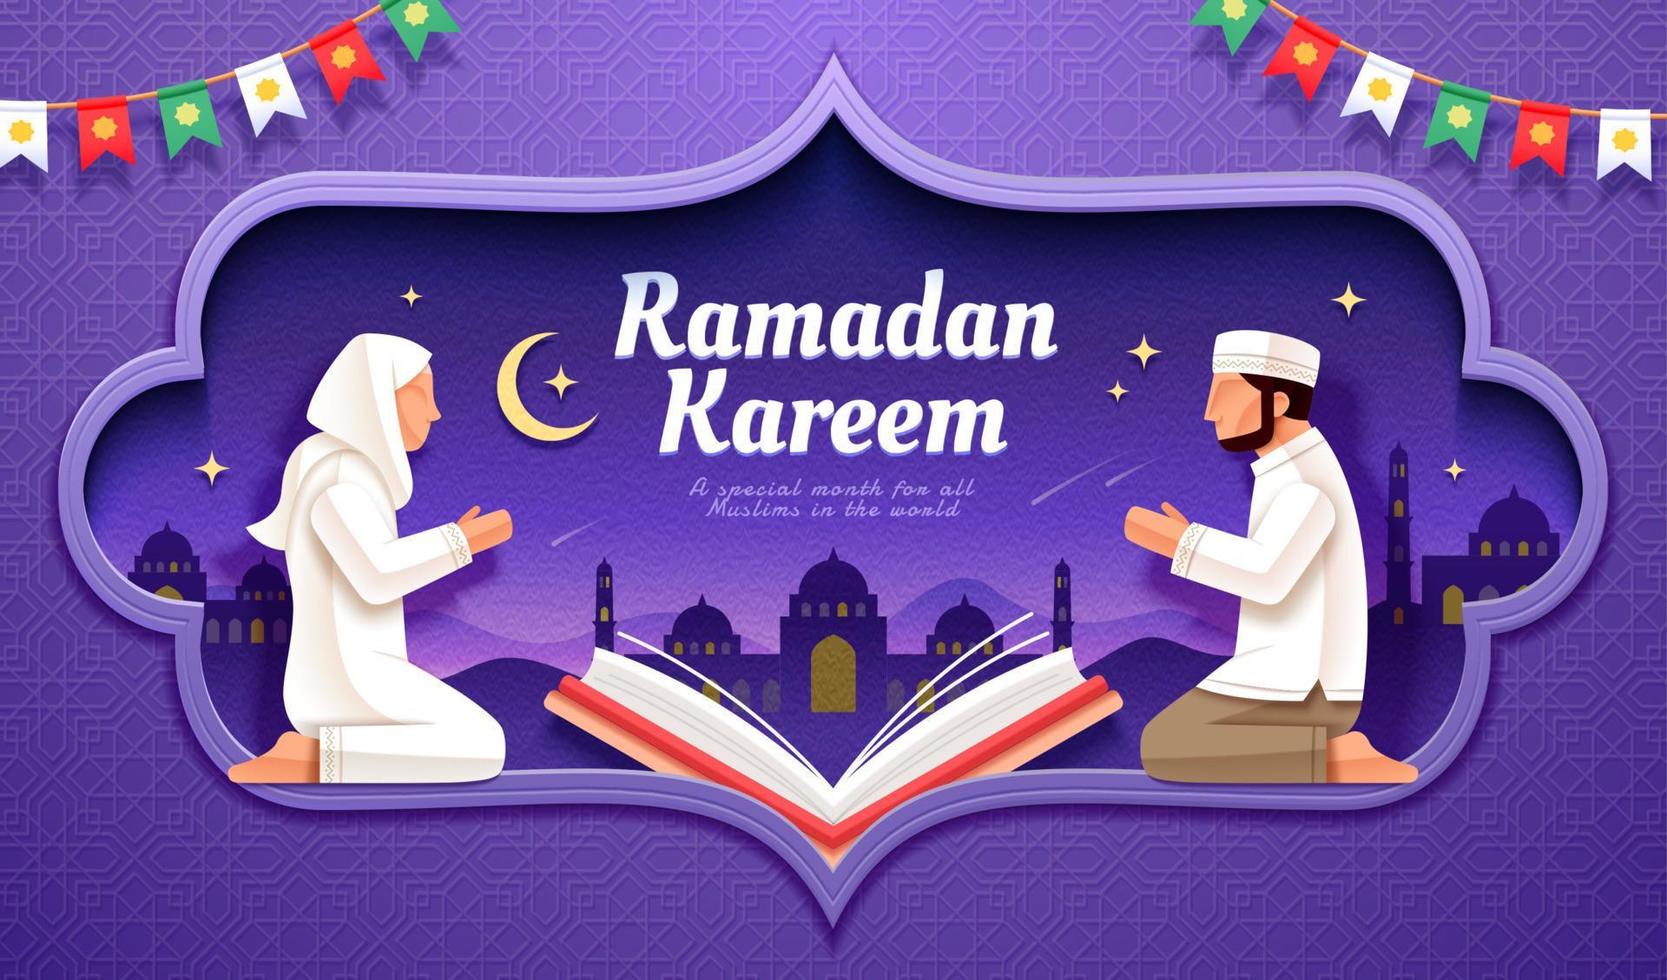 Young couple praying and reading Quran on Mosque silhouette background framed by patterns. 3d illustration of Ramadan or Islamic holiday celebration. vector